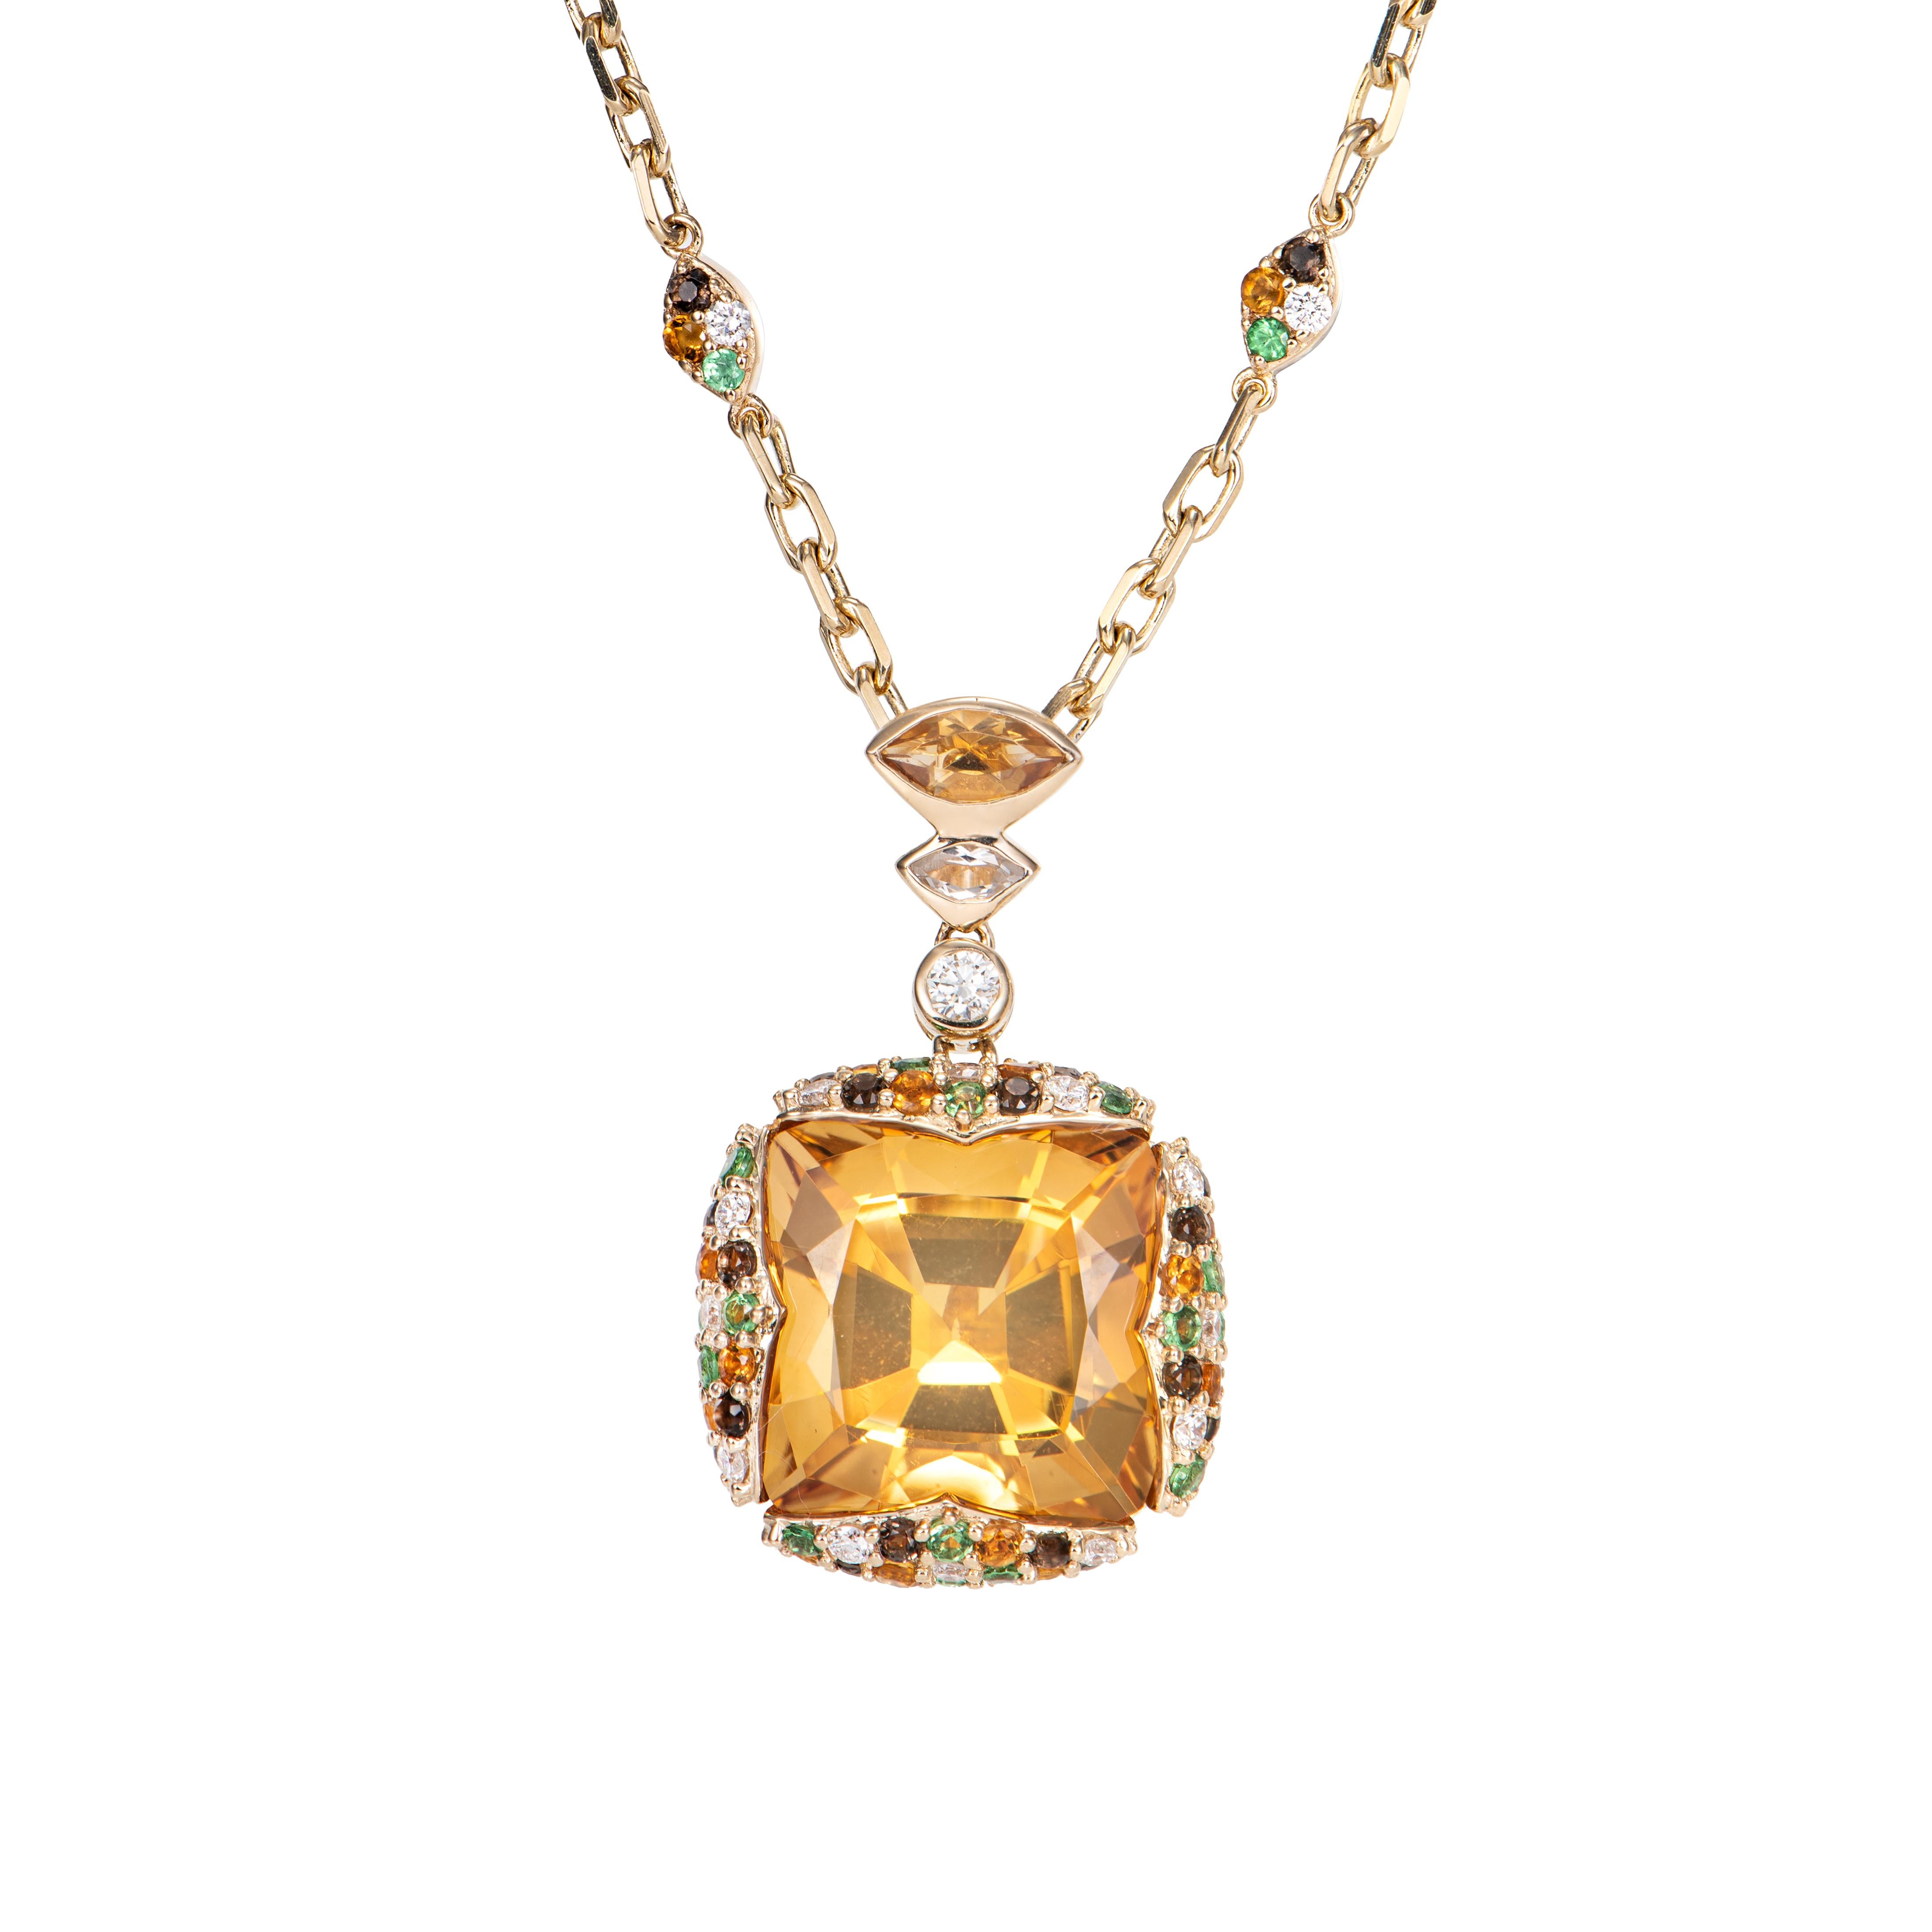 Citrine is natural wonder that come in all shapes and colors. Add a twinkle of brightness to your life with a citrine stone! The Gemstone around the pendant add to the beauty and elegance of the Pendant. These beautiful gems make great gifts for